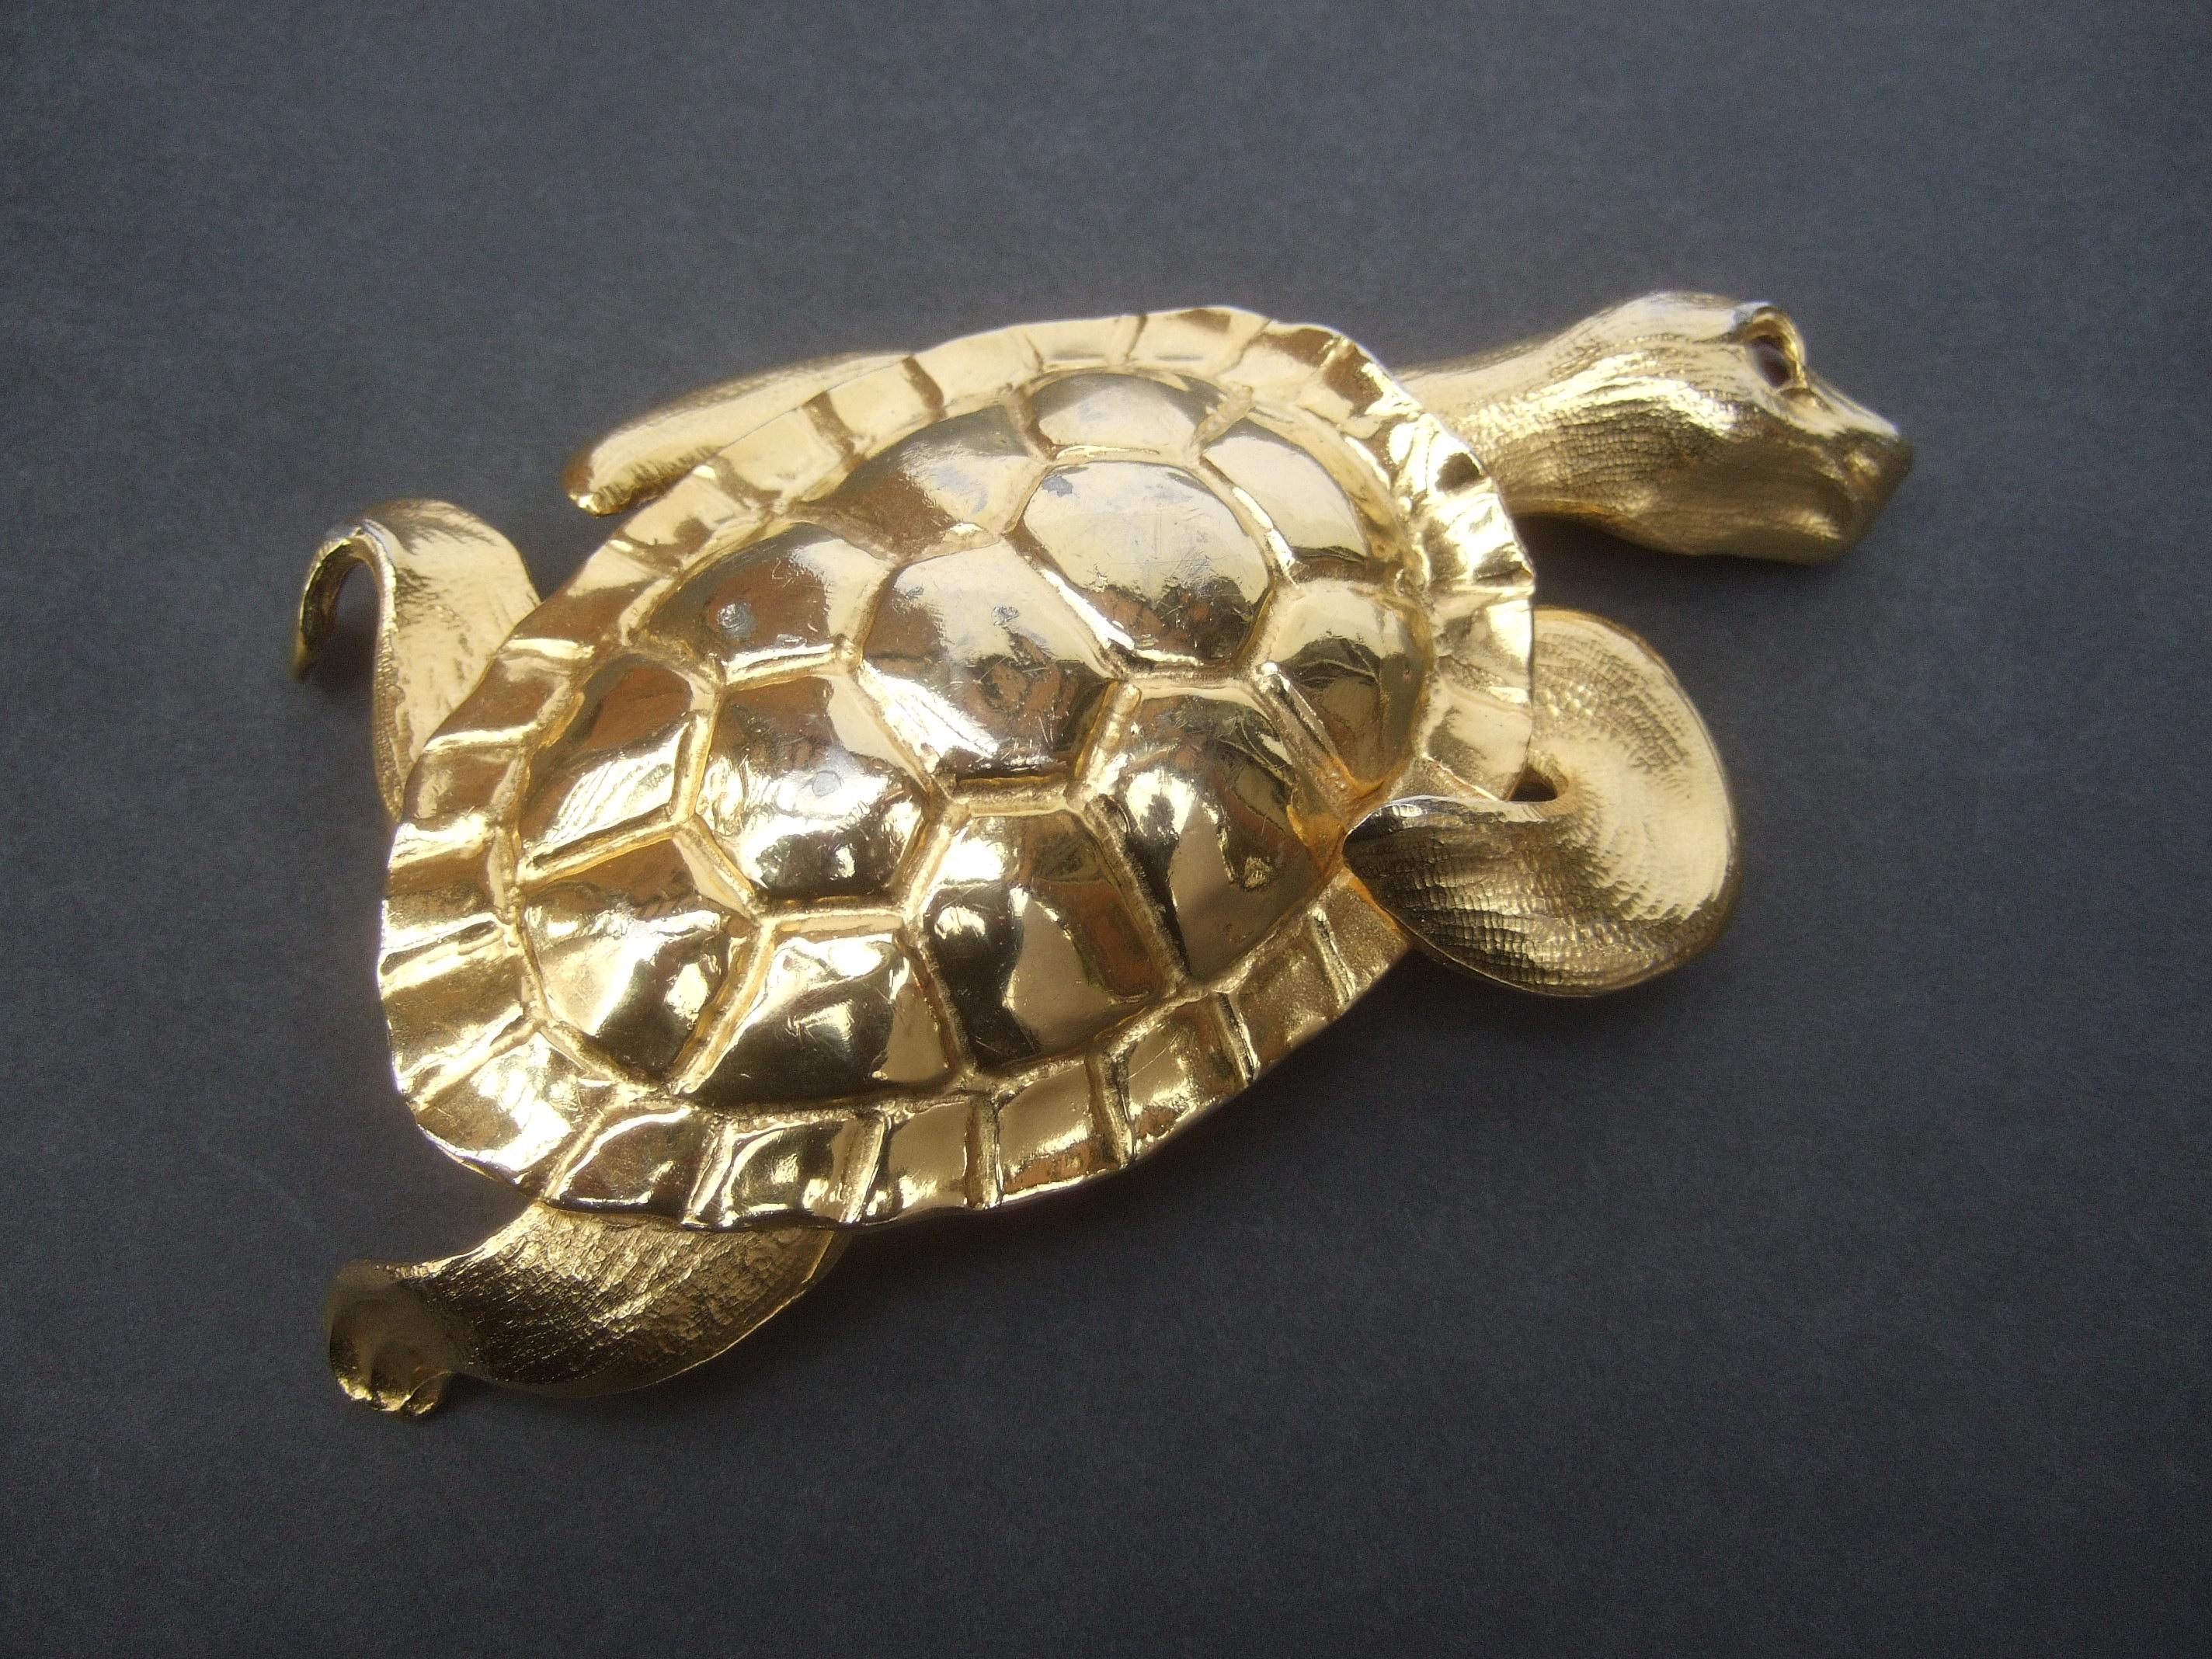 Christopher Ross Massive huge-scale  24k gold plated turtle belt buckle c 1980s
The humongous large size belt buckle is designed with a stylized turtle figure
The turtle's shell is sheathed with shiny gilt metal plating. In contrast the turtle's